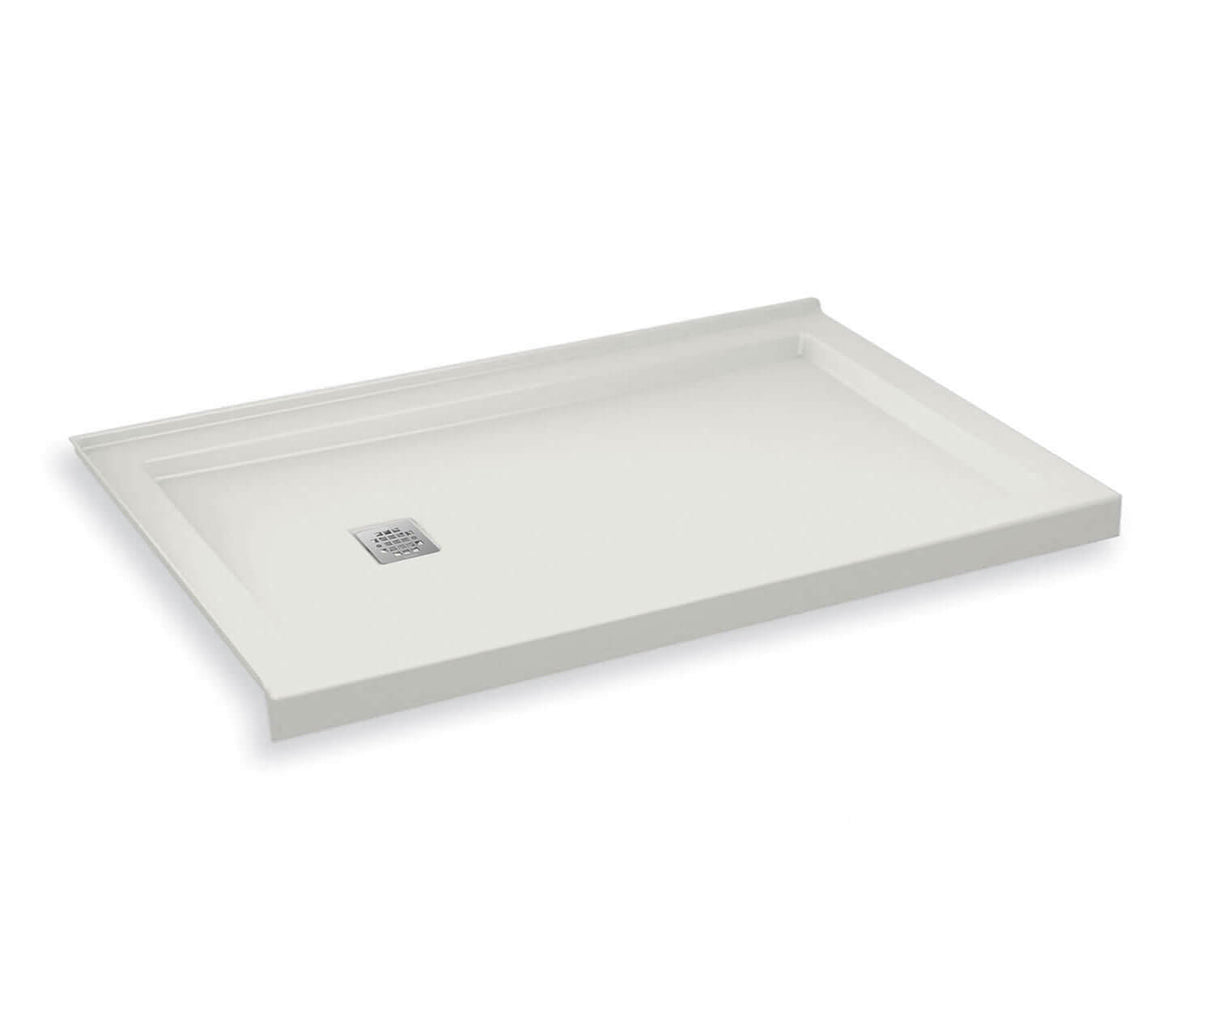 MAAX 420004-502-001-100 B3Square 6030 Acrylic Corner Left Shower Base in White with Left-Hand Drain